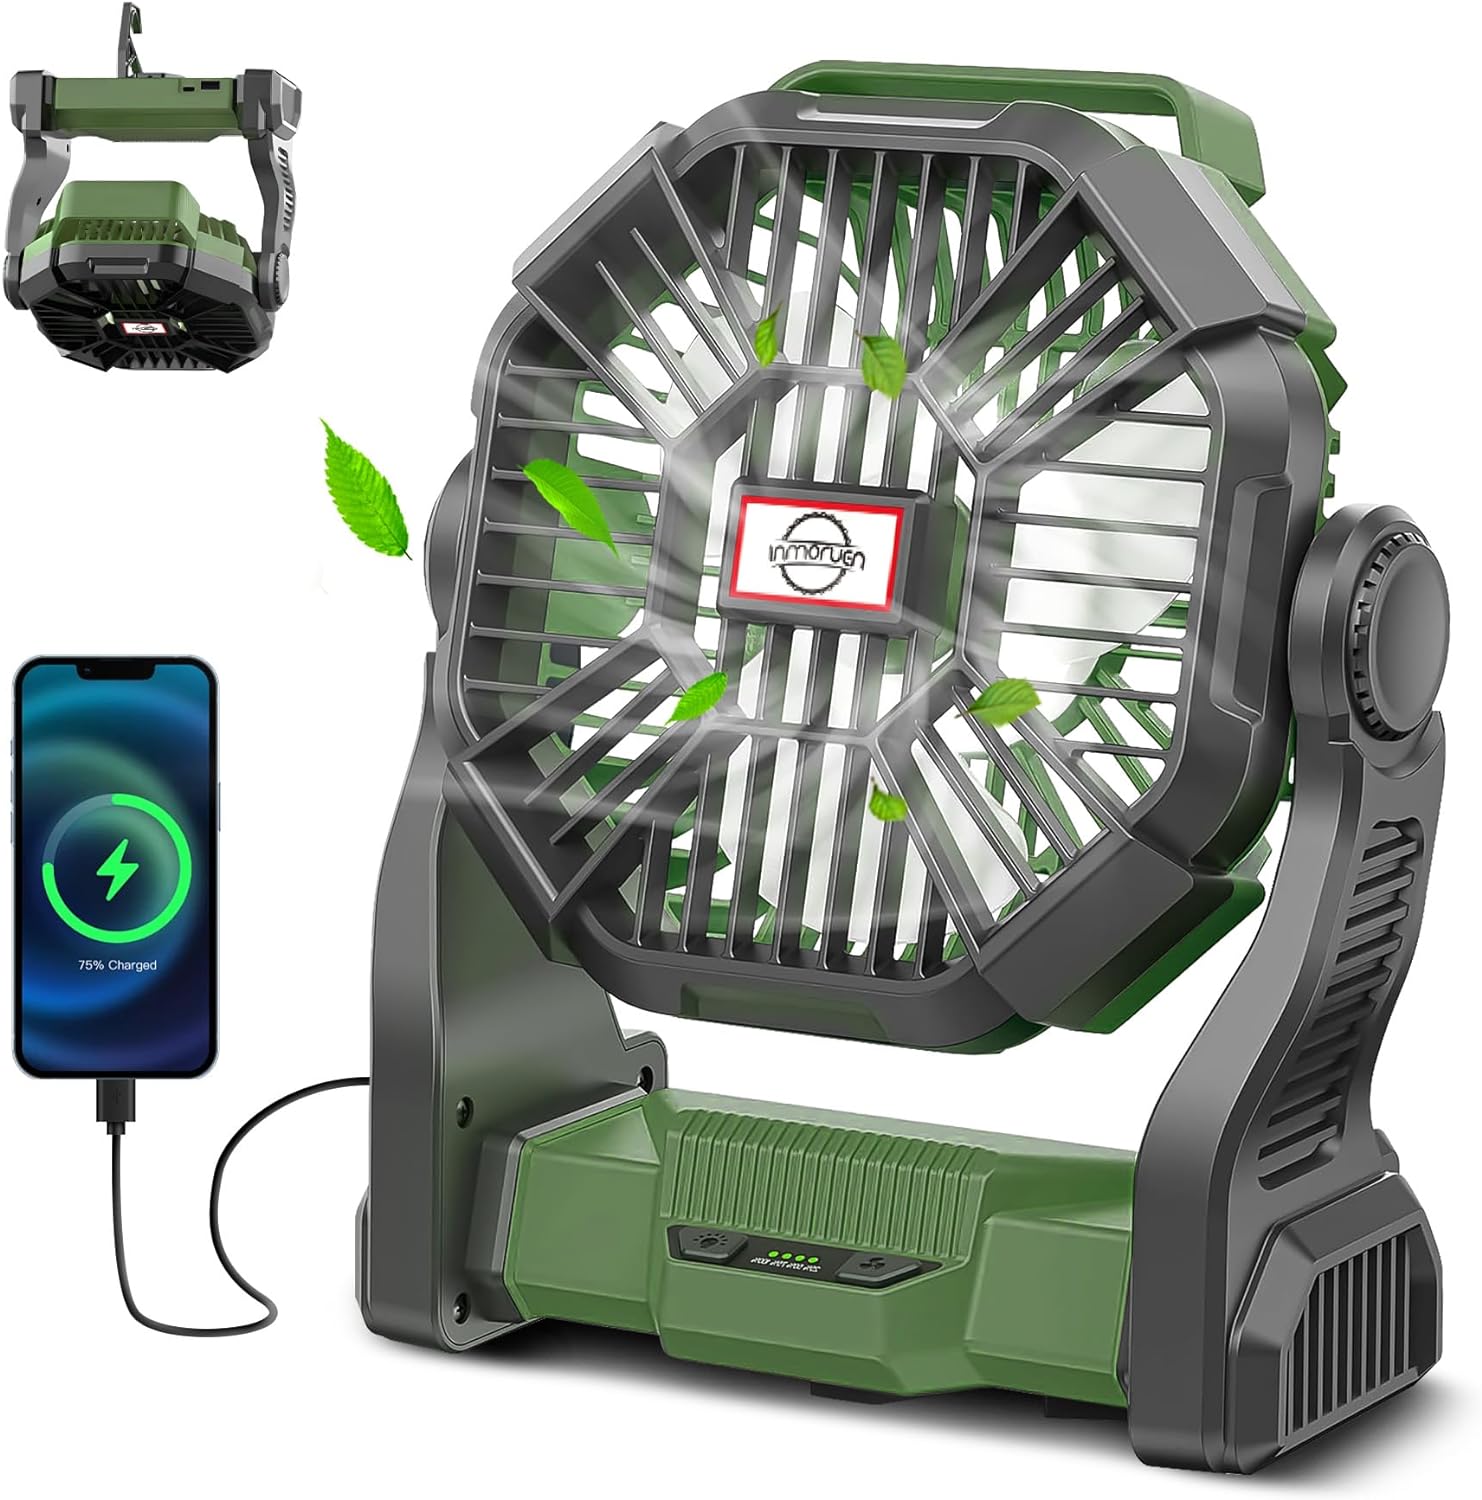 CONBOLA Portable Rechargeable Camping Fan for Tent with LED Lantern, 10-Inch Battery Operated Outdoor Fan with Hanging Hook, 270 Rotation, Small Quiet Personal Usb Cooling Fan for Travel, Fishing